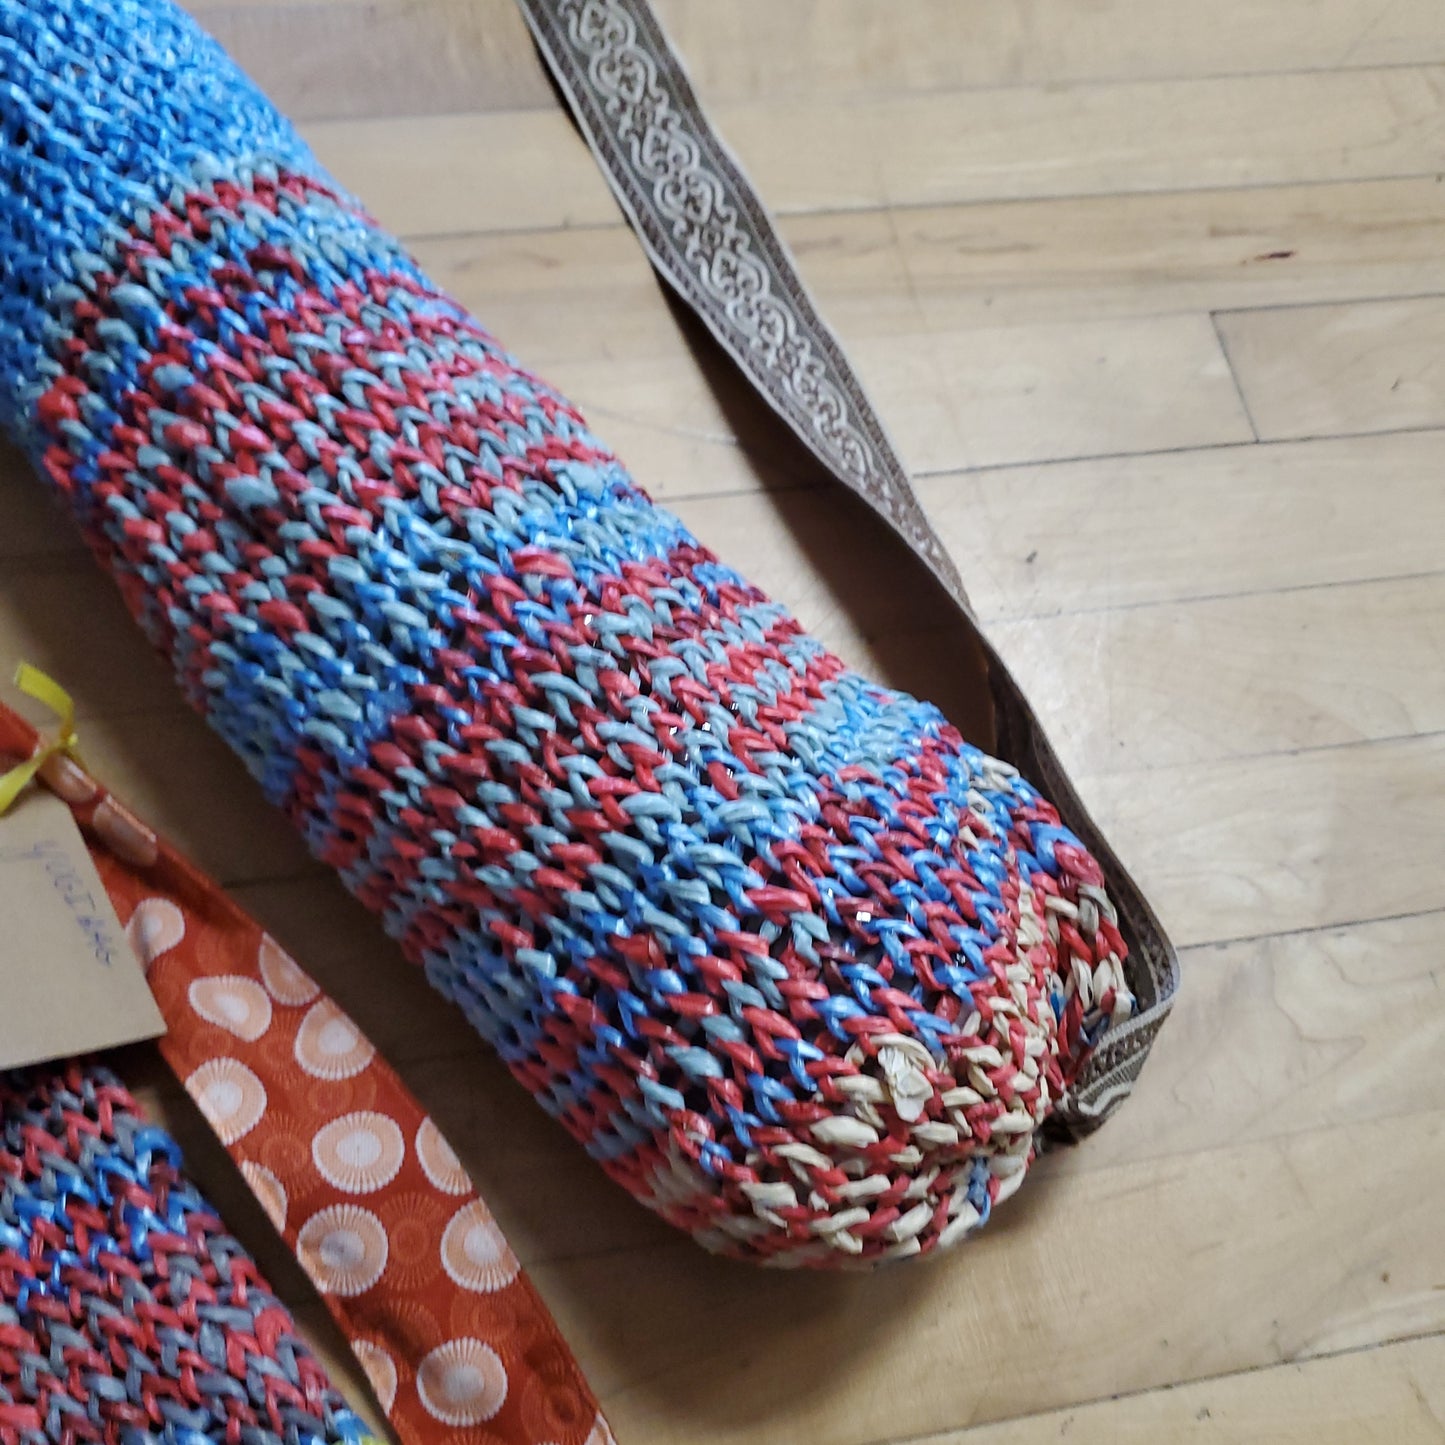 Knit Recycled Materials Yoga Mat Bags